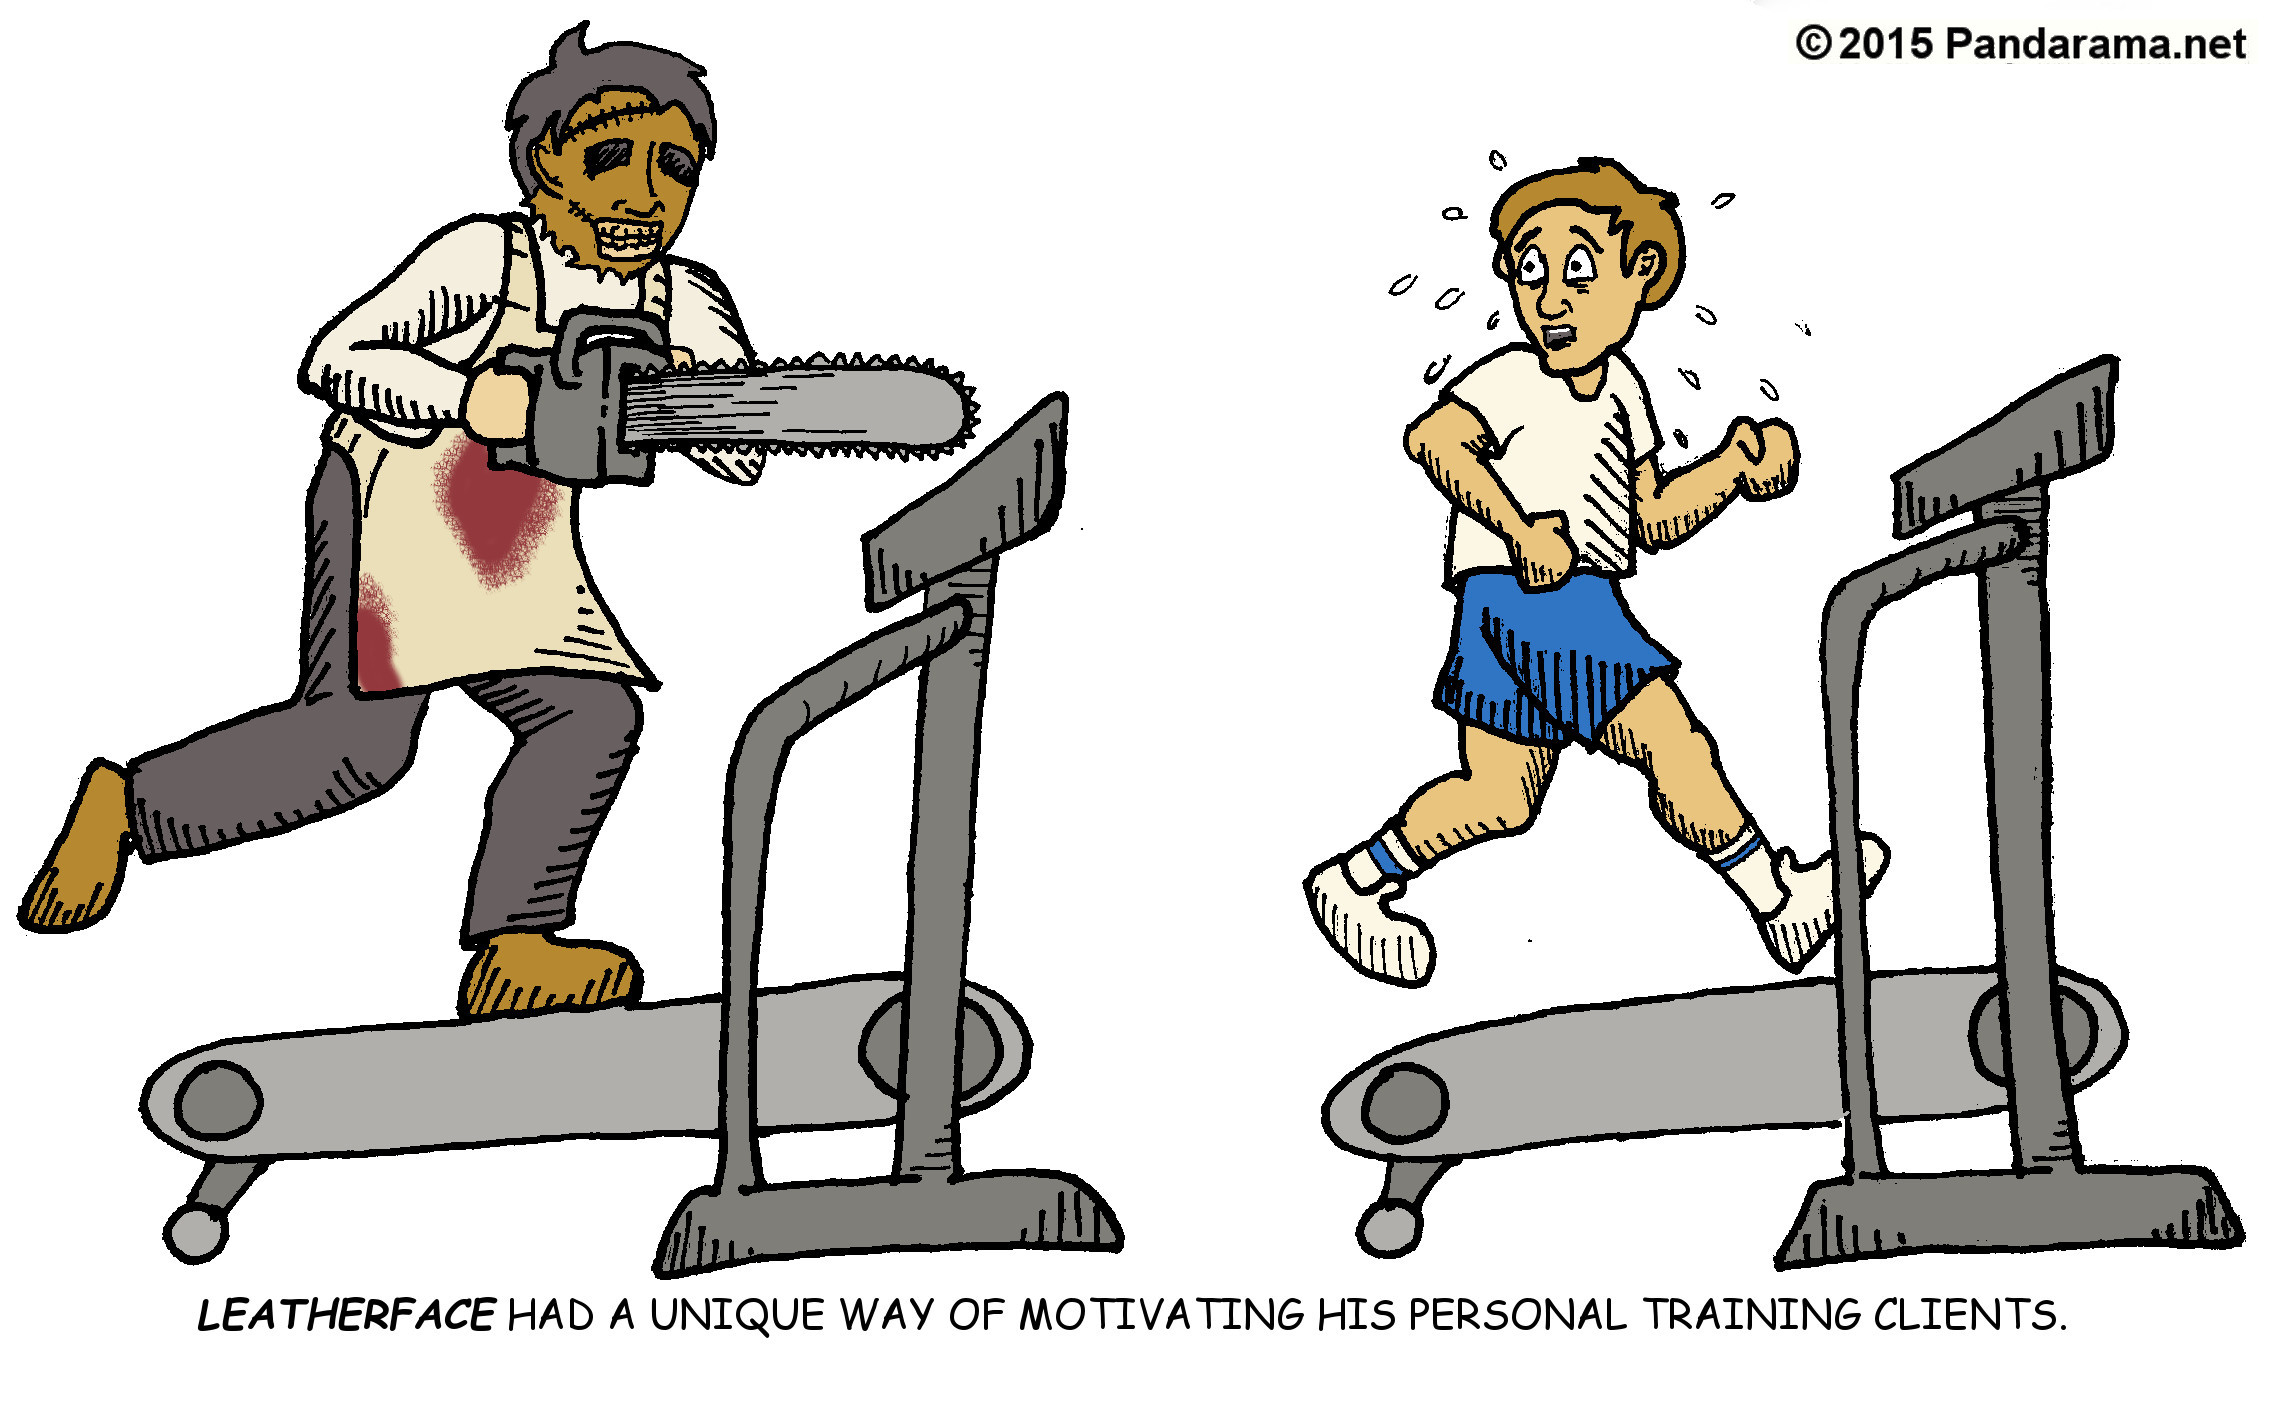 Pandarama.net Pandarama satrical cartoon of Leatherface on a treadmill behind a man who is running from him on a seperate treadmill.